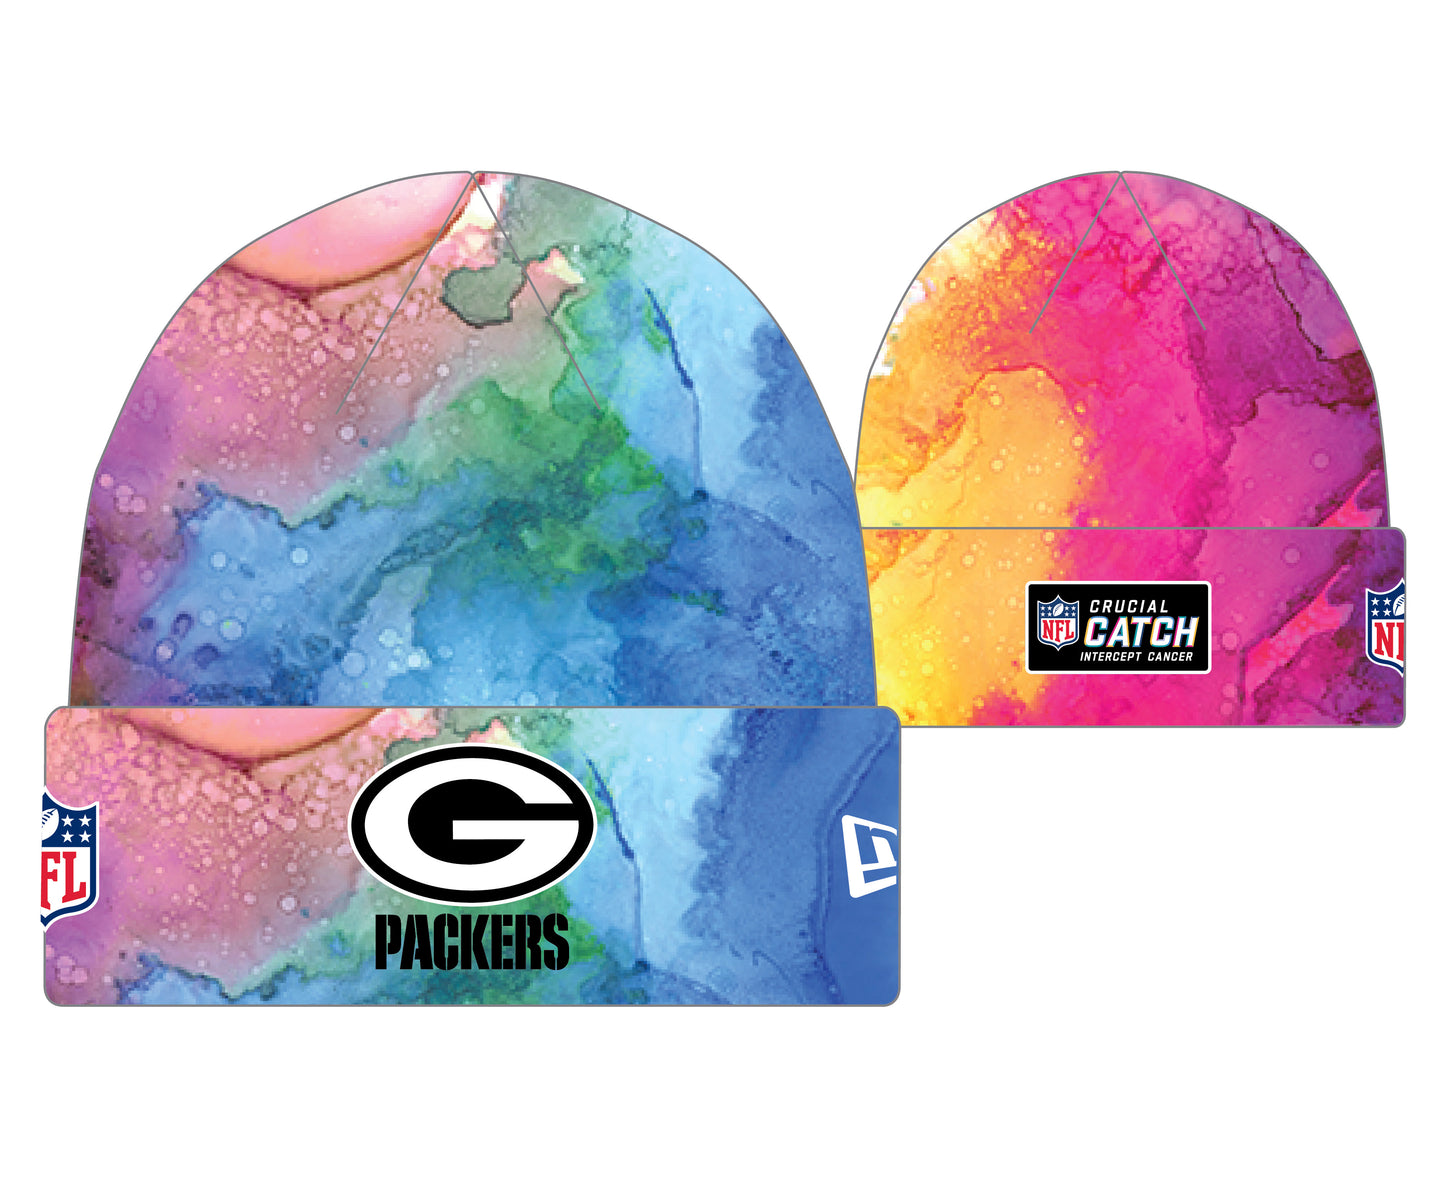 NFL Green Bay Packers New Era Crucial Catch Knit Hat- Pink Ink